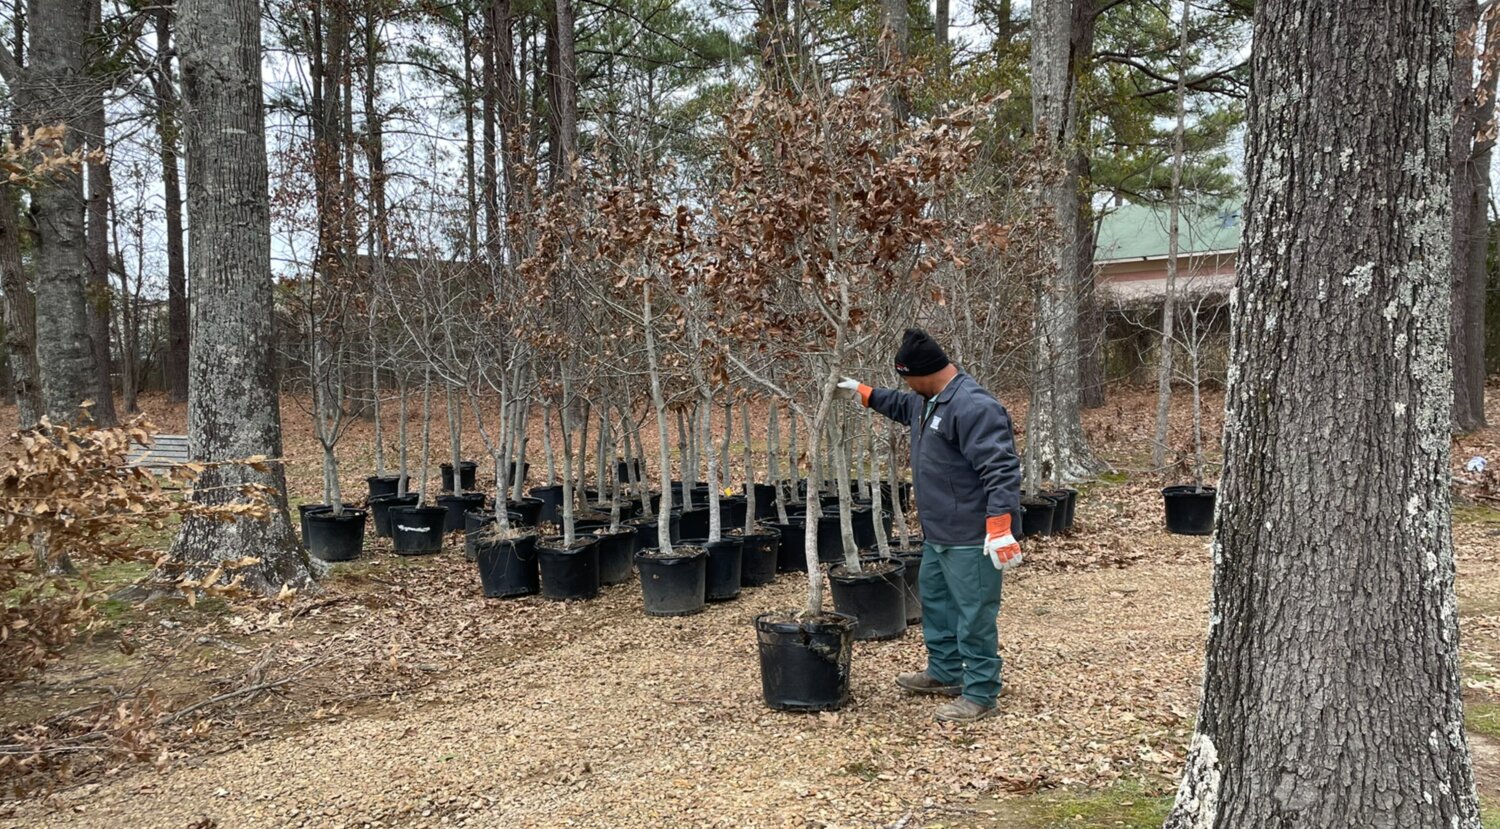 Over 100 oak trees were recently donated to the city of Ridgeland.